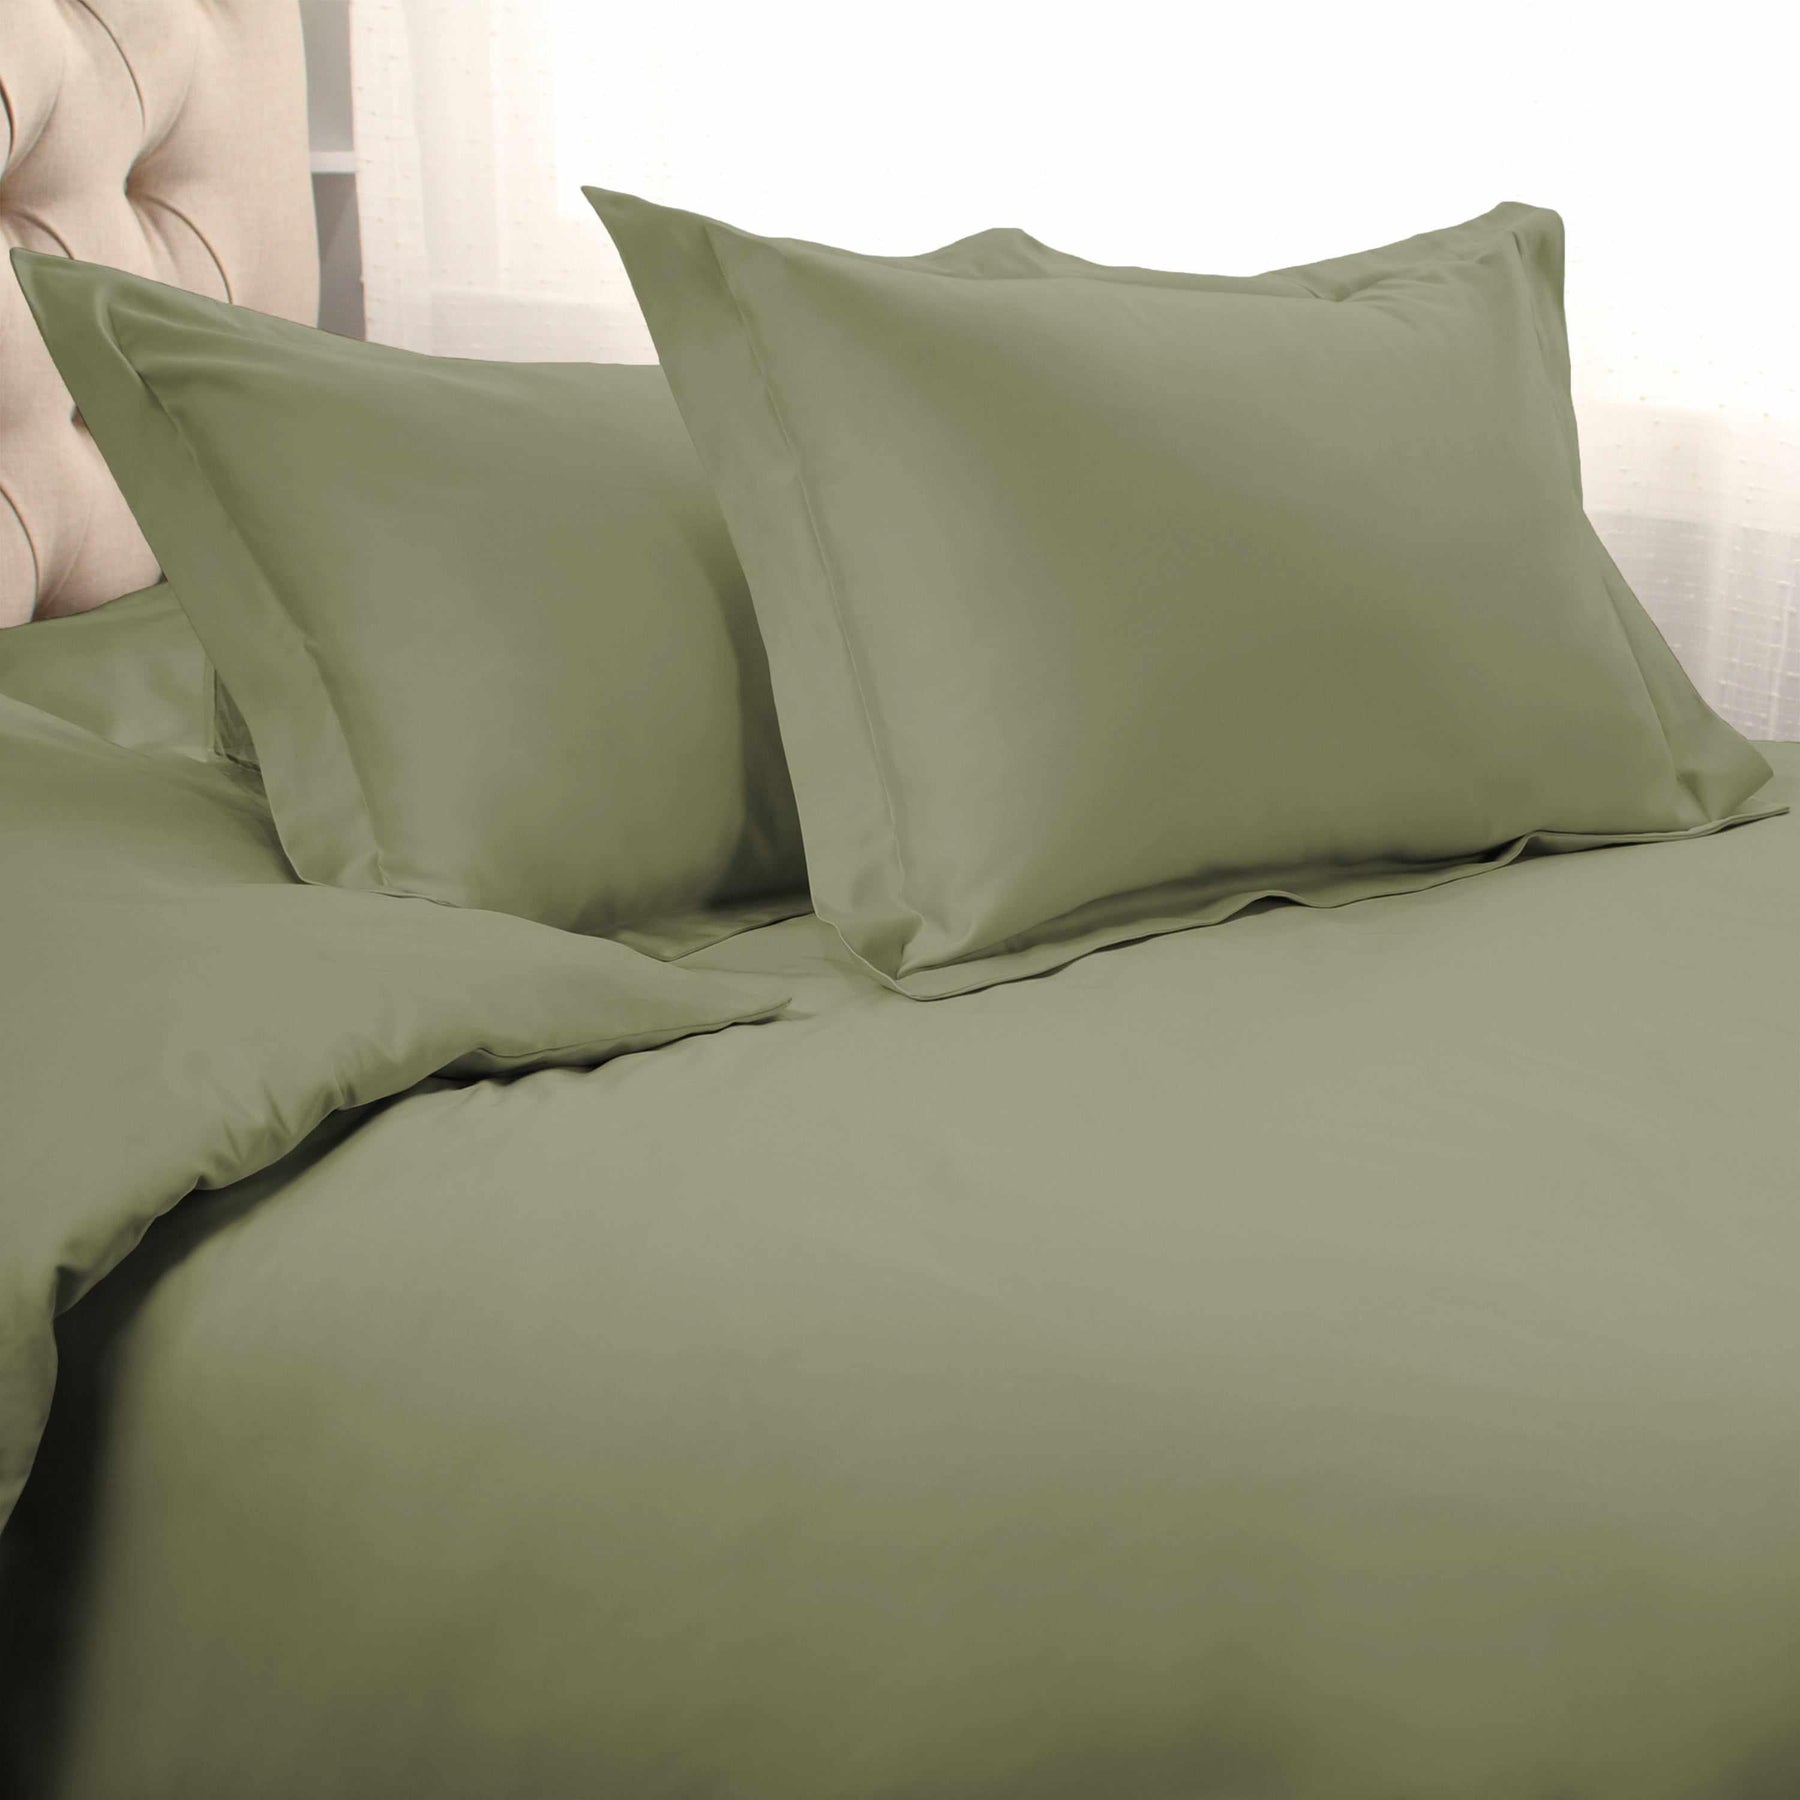  Superior Solid 1500 Thread Count Egyptian Cotton Duvet Cover Set - Sage